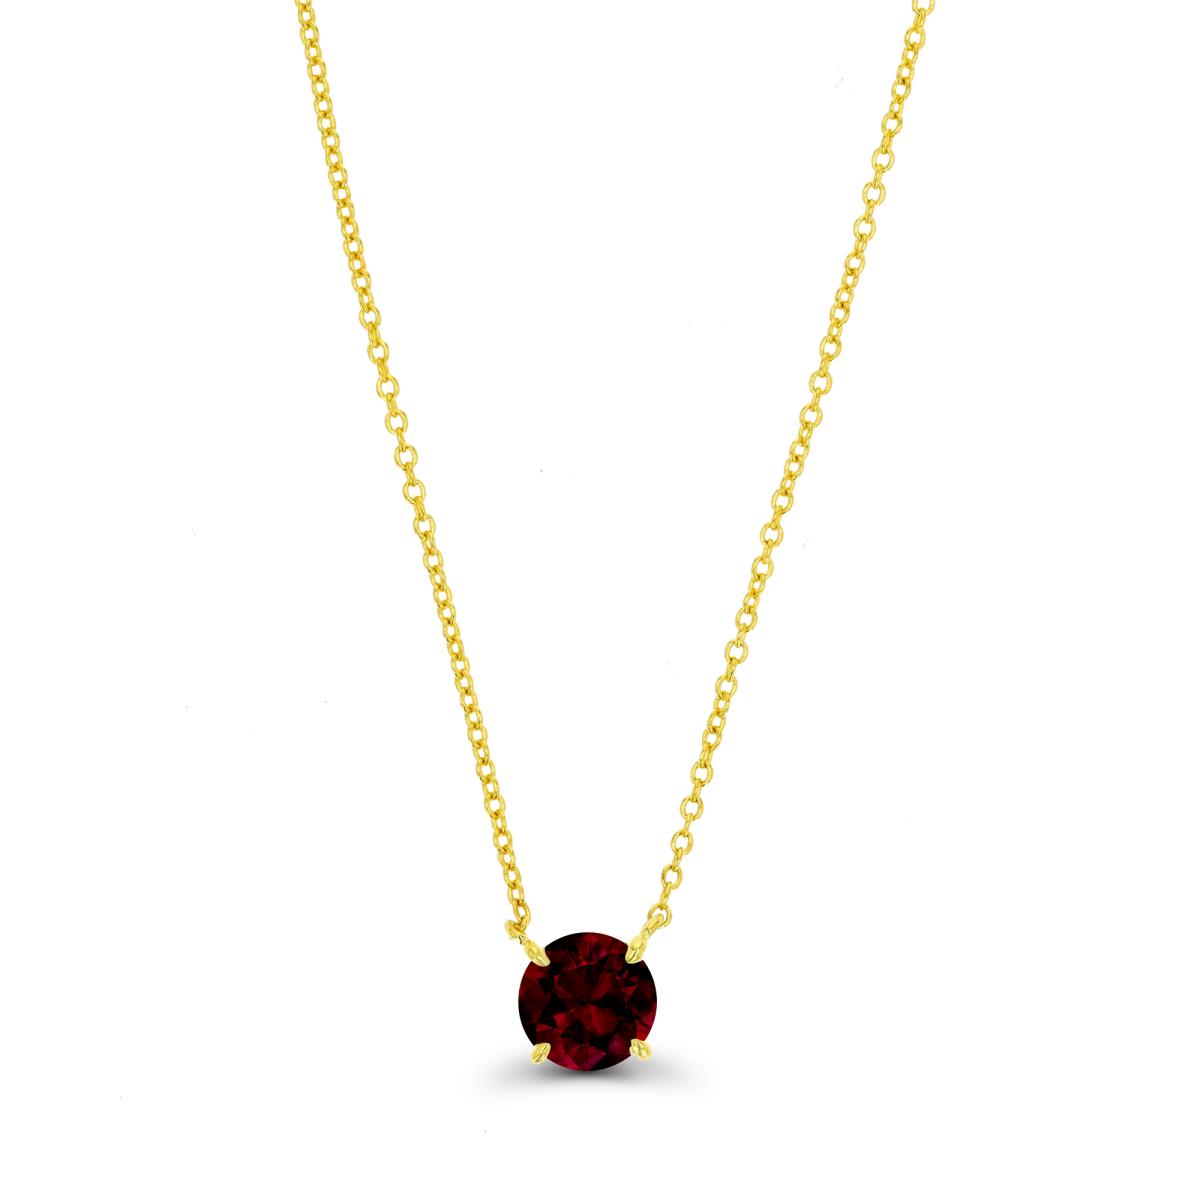 14K Yellow & 6MM RD Ct. Garnet Solitaire 16+2" Necklace